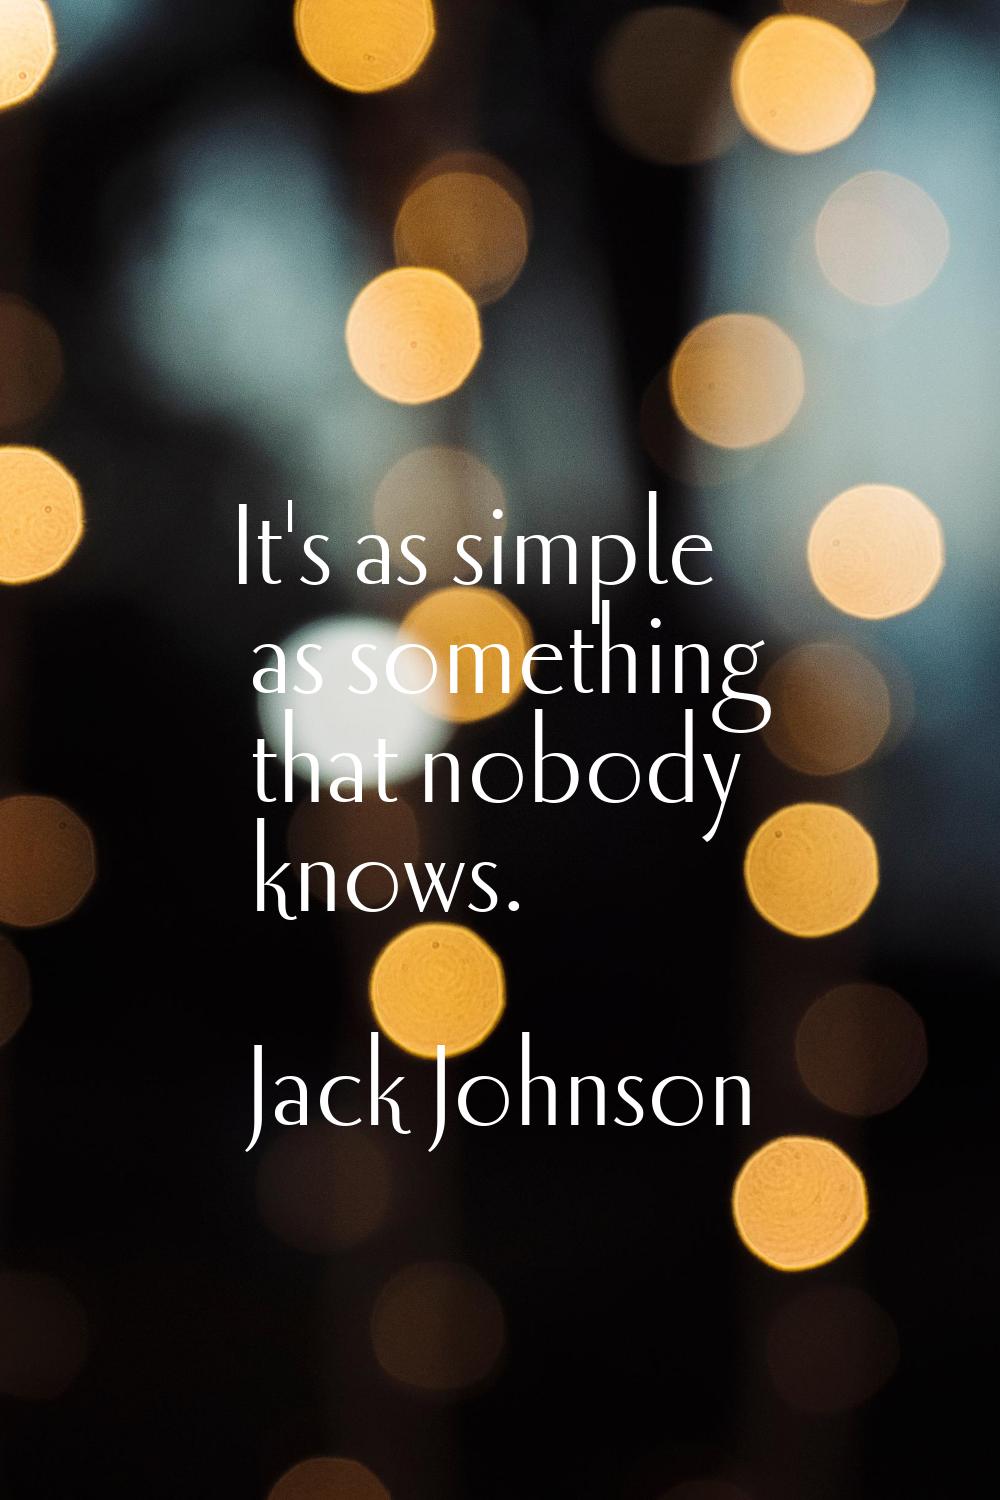 It's as simple as something that nobody knows.